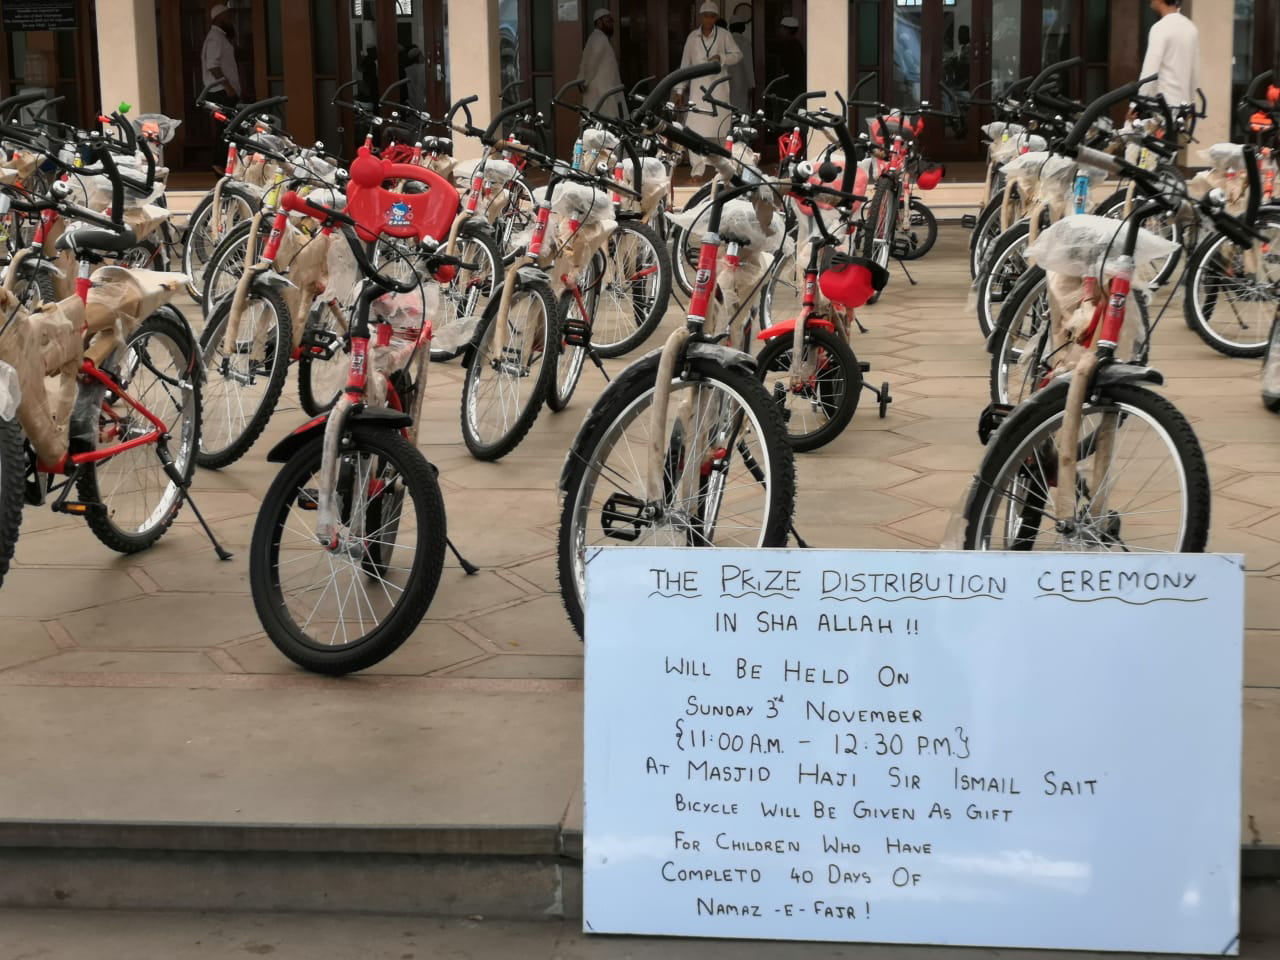 This Mosque Is Giving Free Bikes To All Kids Who Pray Fajr For 40 Days